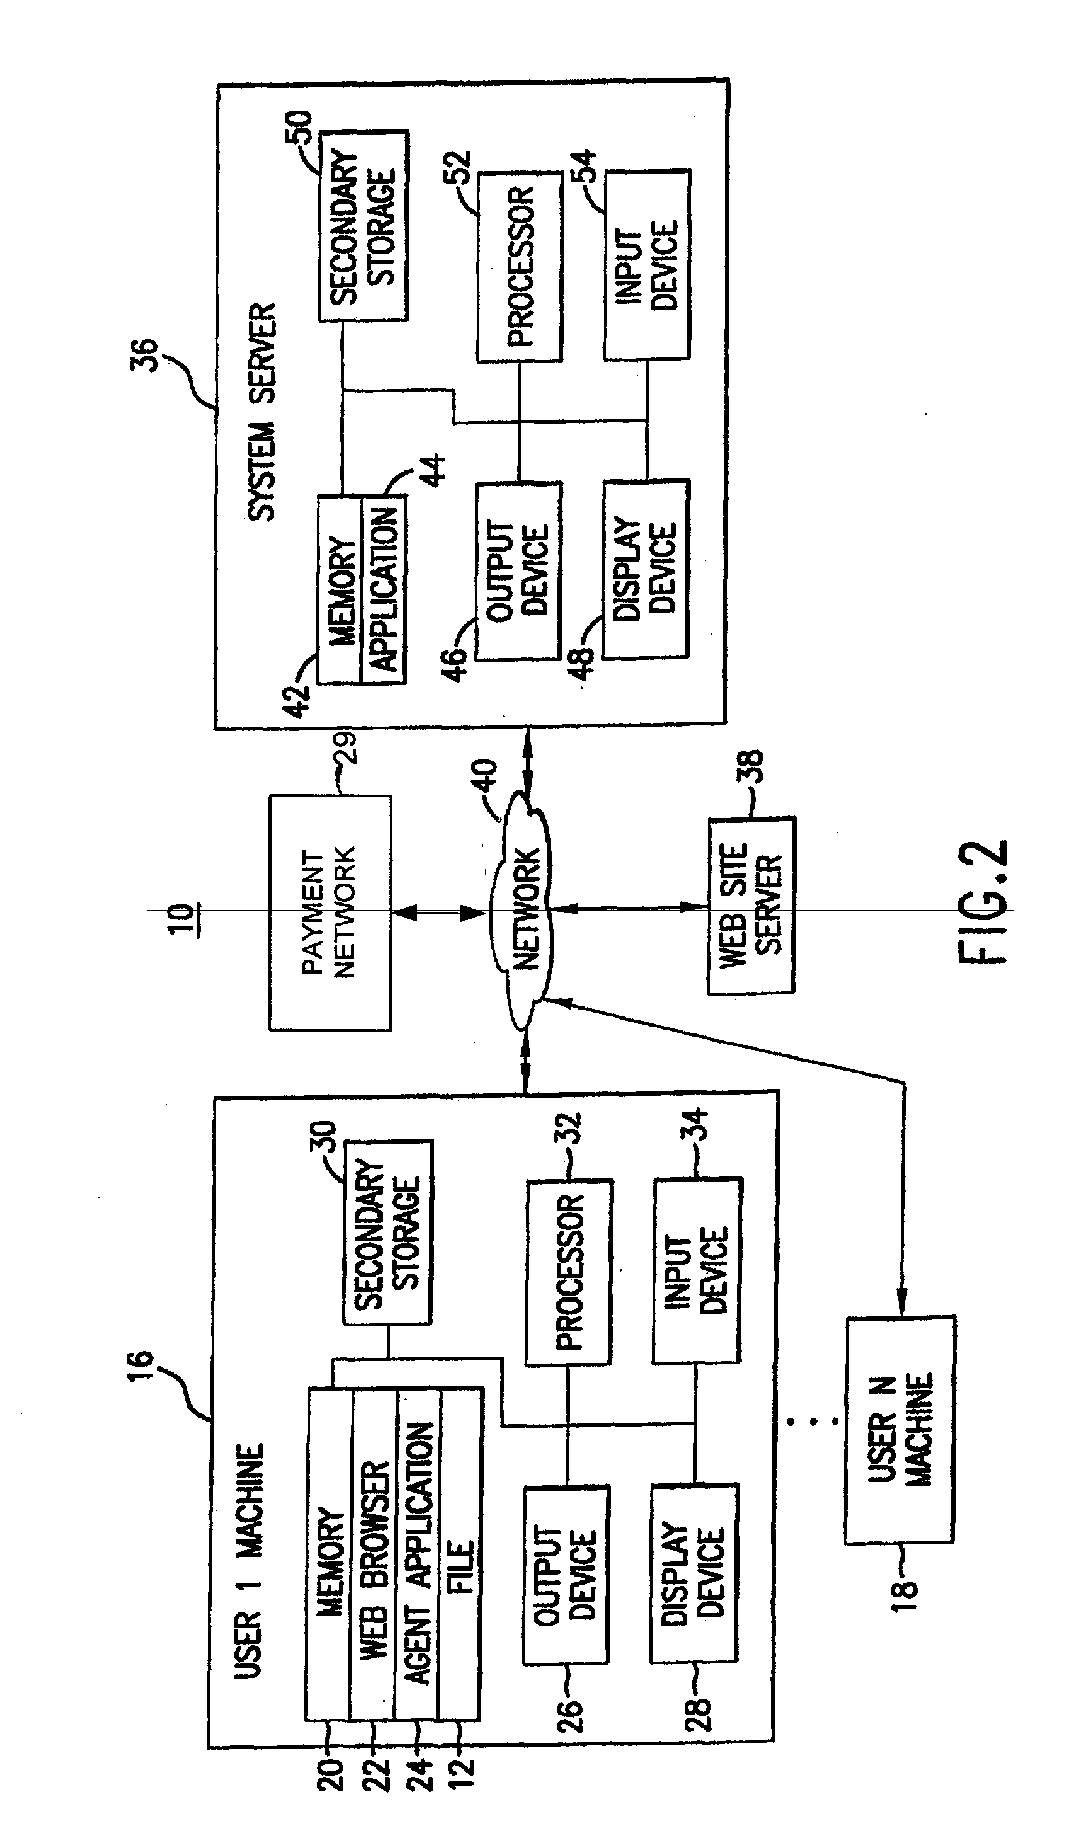 Software agent for facilitating electronic commerce transactions through display of targeted promotions or coupons